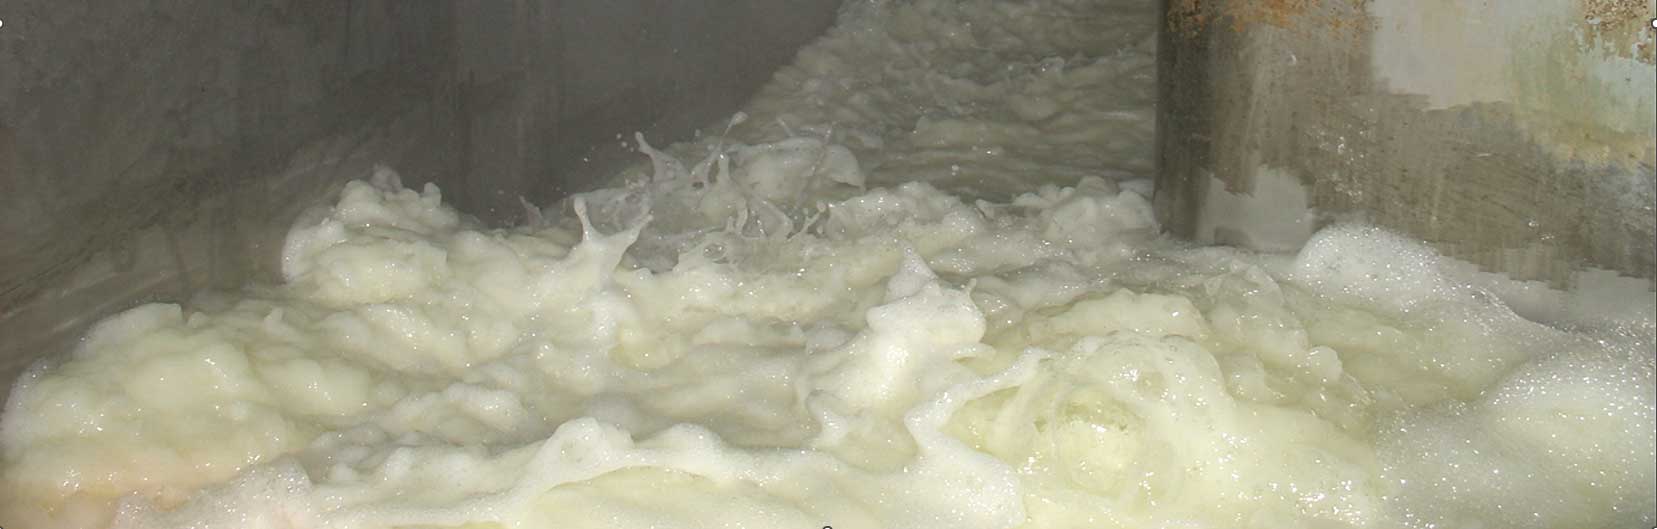 Defoaming in a white water tray